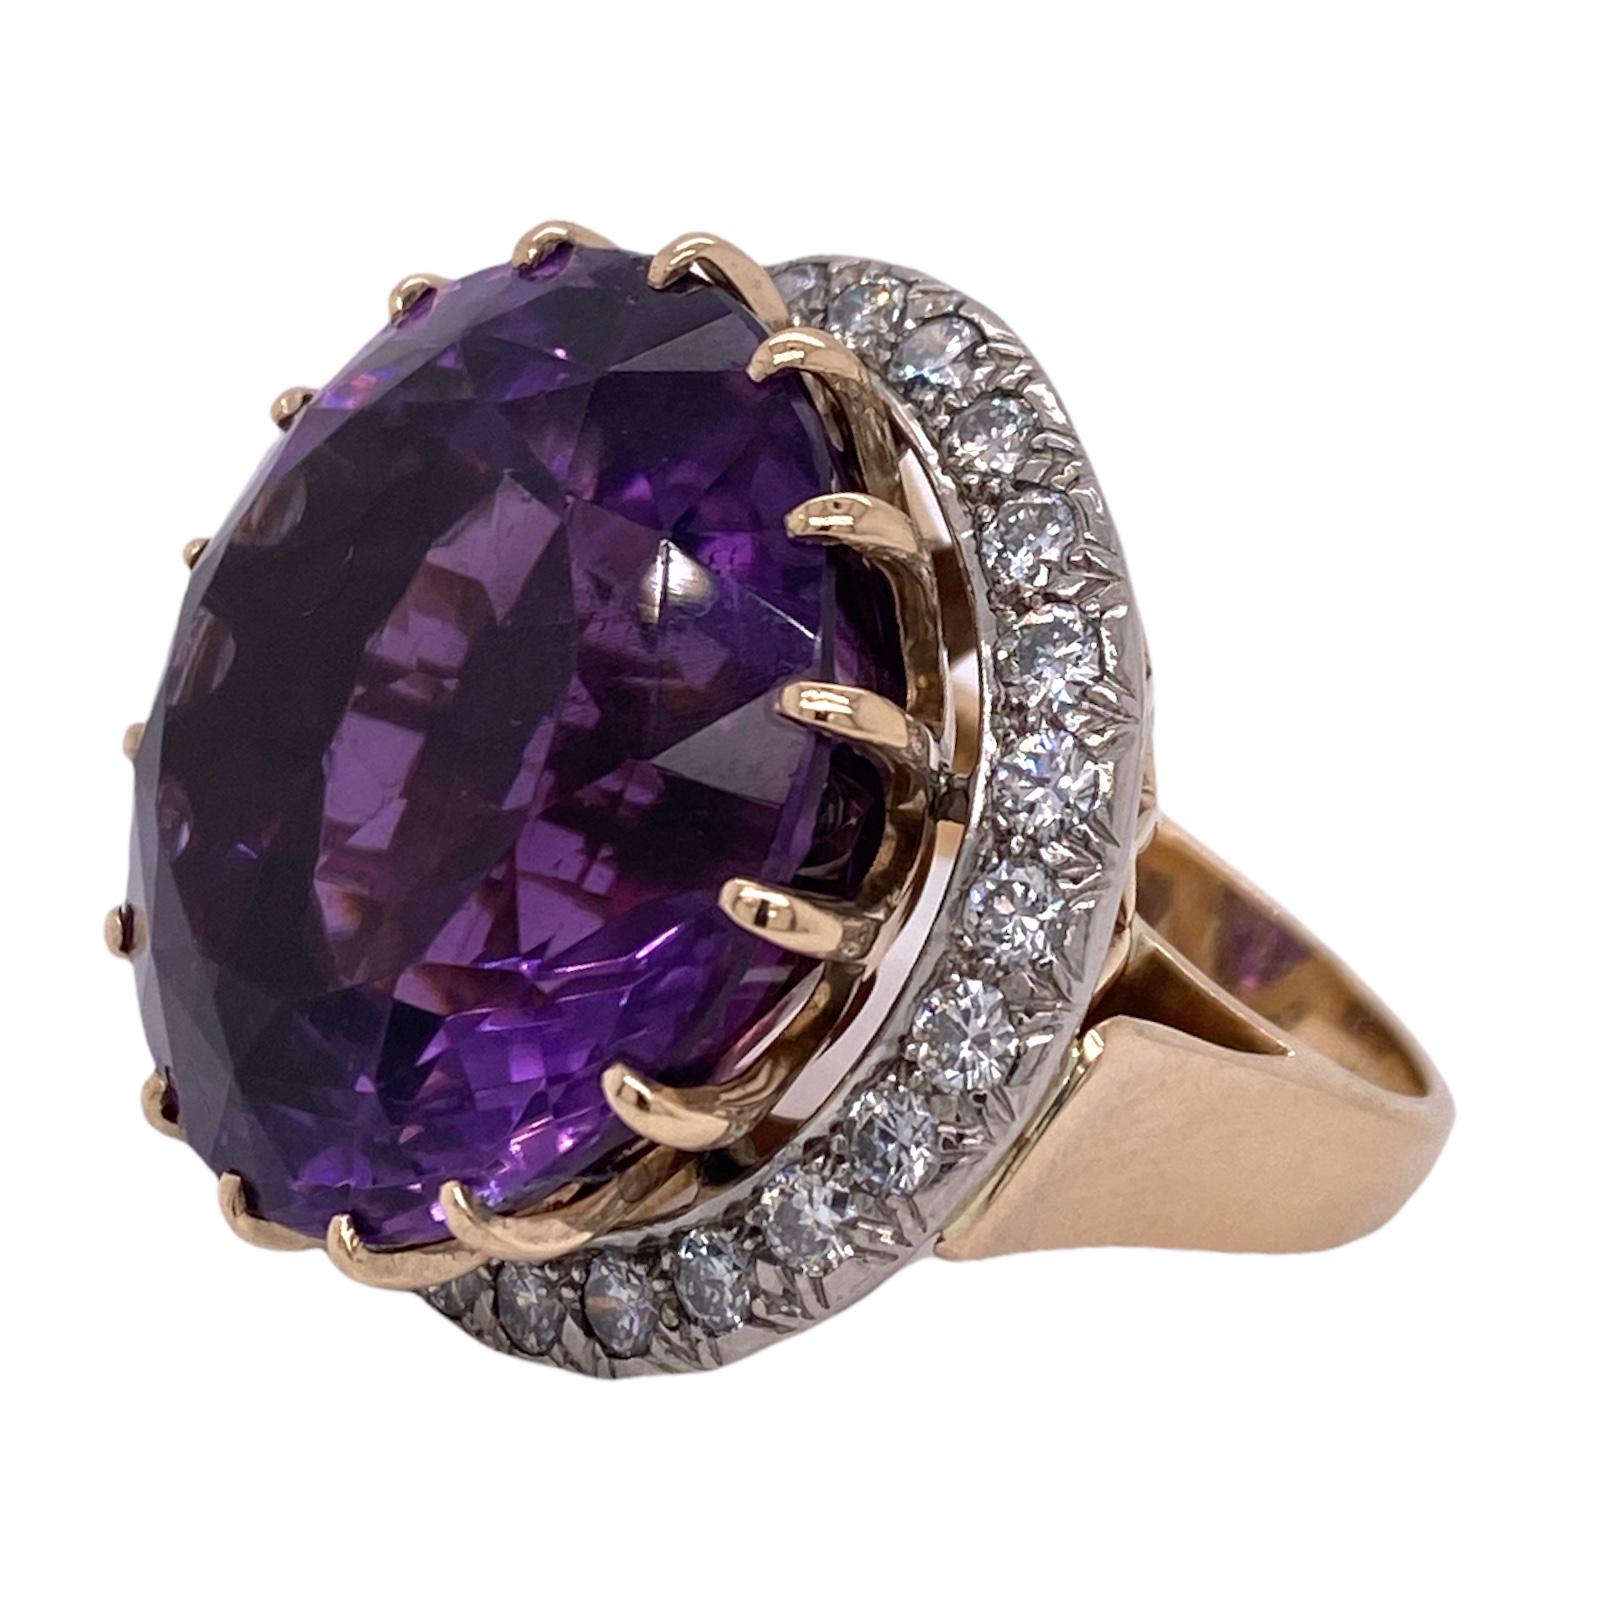 Stunning vintage cocktail ring fashioned in 14 karat yellow gold. The ring features an approximately 52 carat round amethyst gemstone with an under halo of 26 round brilliant cut diamonds weighing approximately 2.50 carat total weight. The diamonds